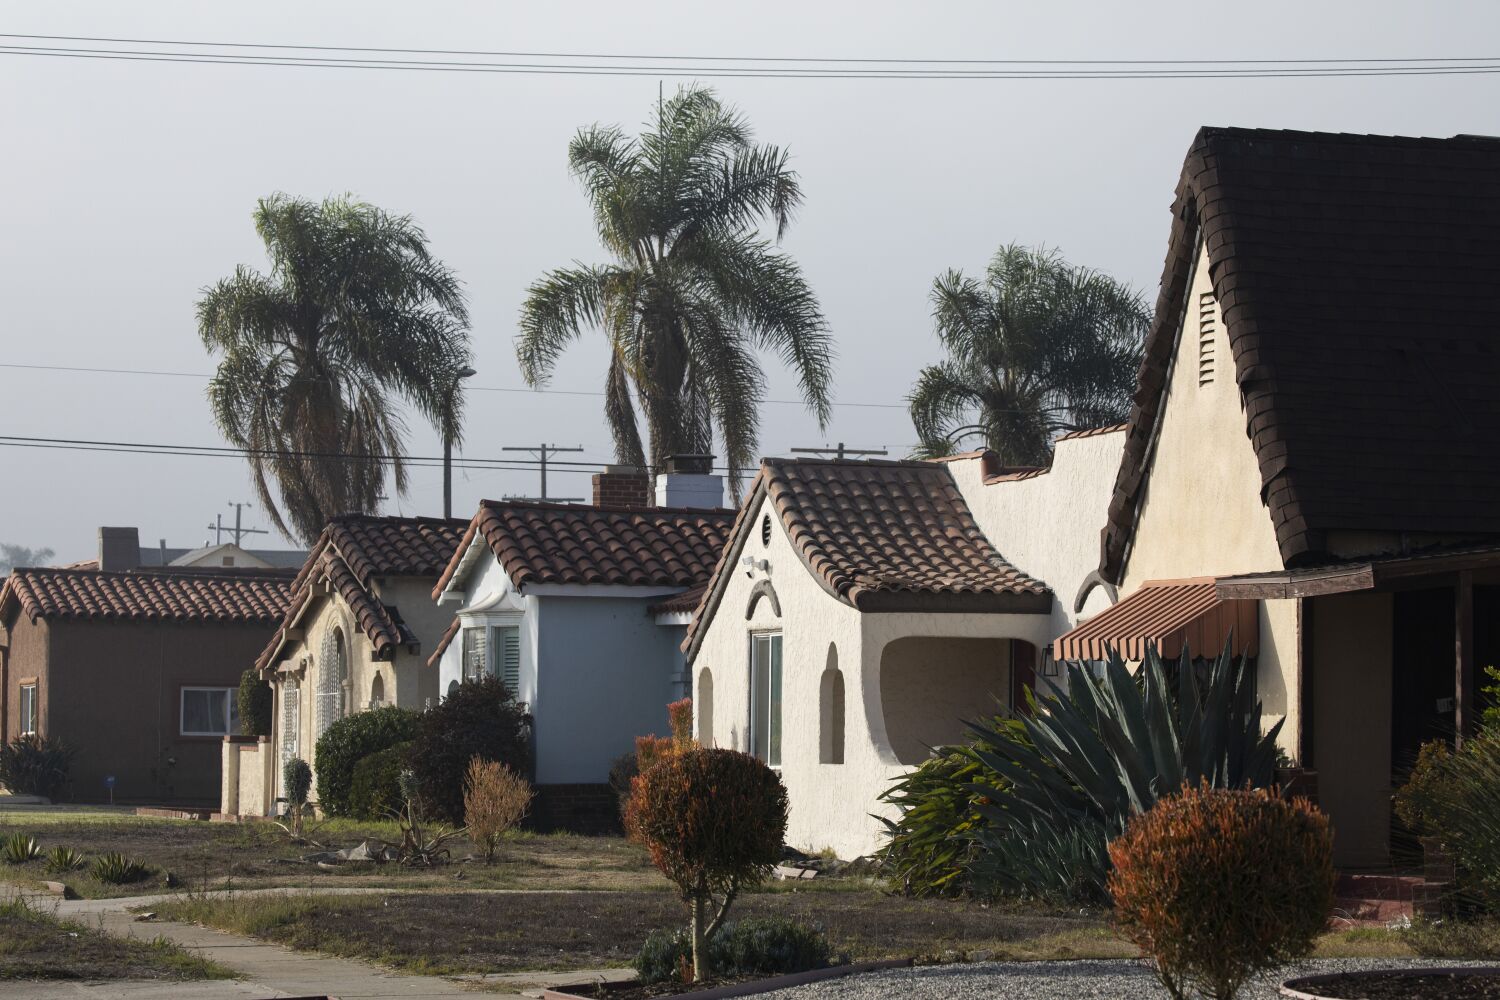 Opinion: The $1 million home is becoming the norm in L.A. This is an outrage we could have prevented 